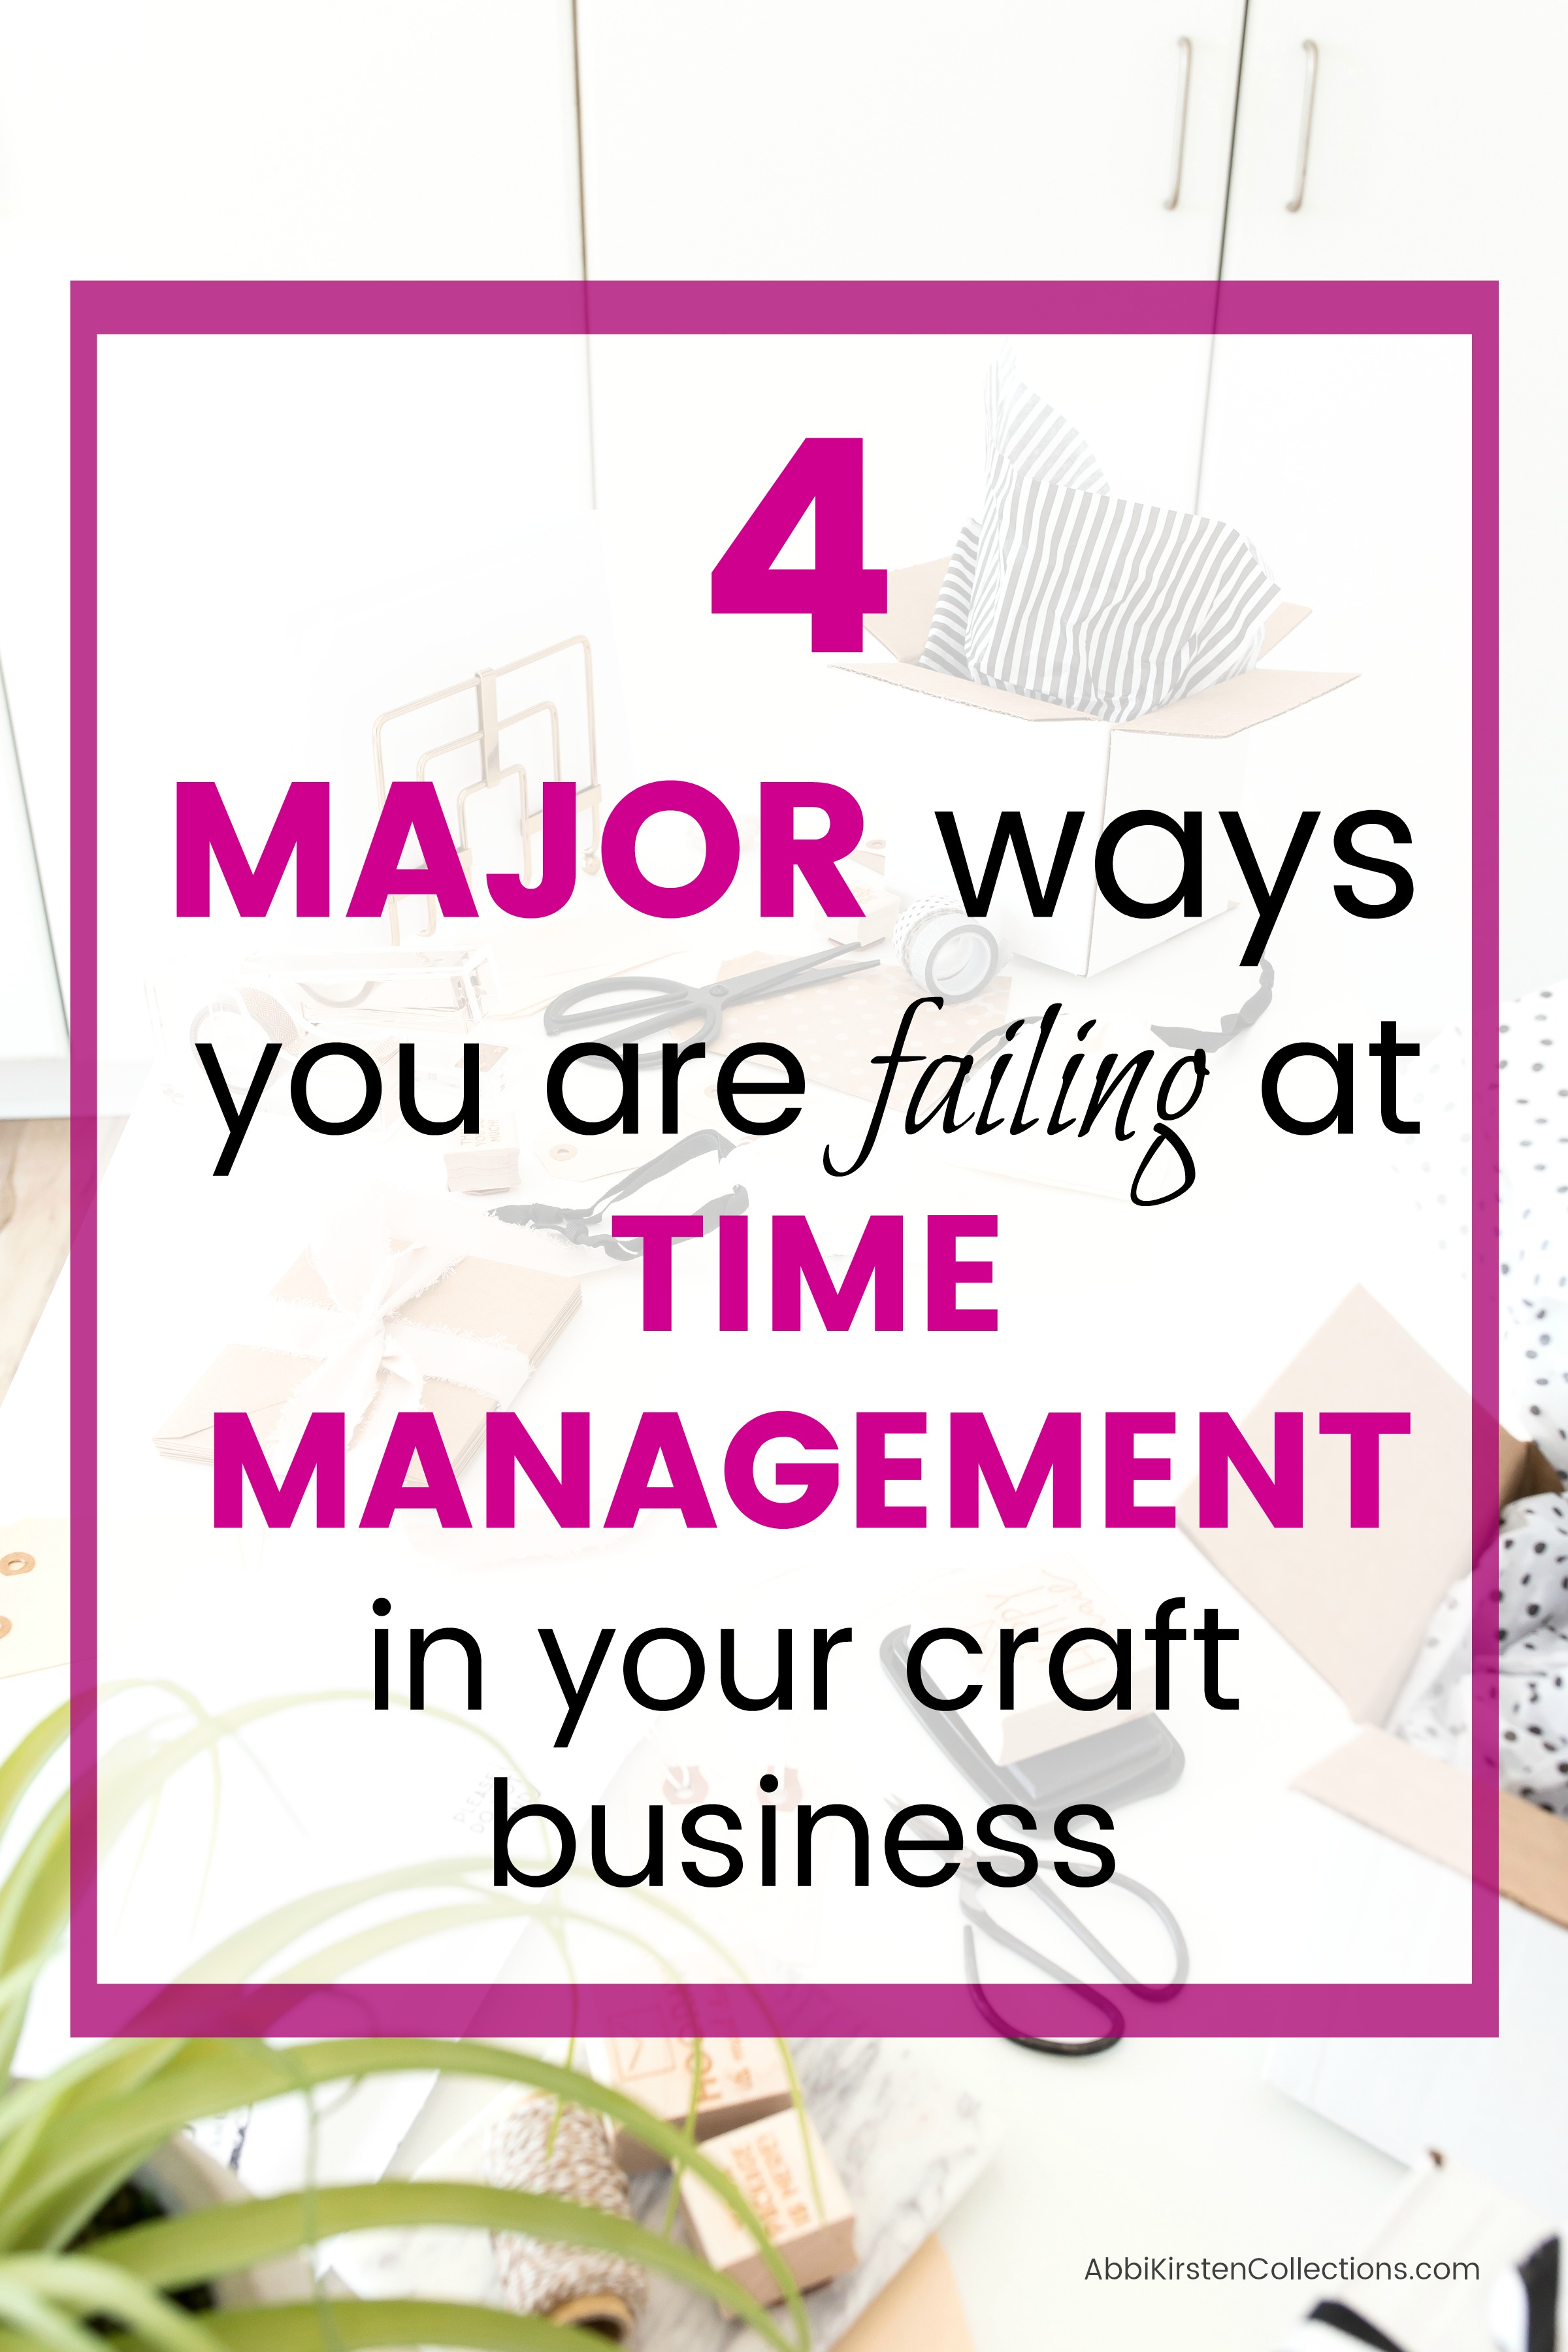 Text is overlaid on an image of a cluttered crafting workspace. The text reads, “4 major ways you are failing at time management in your craft business.”